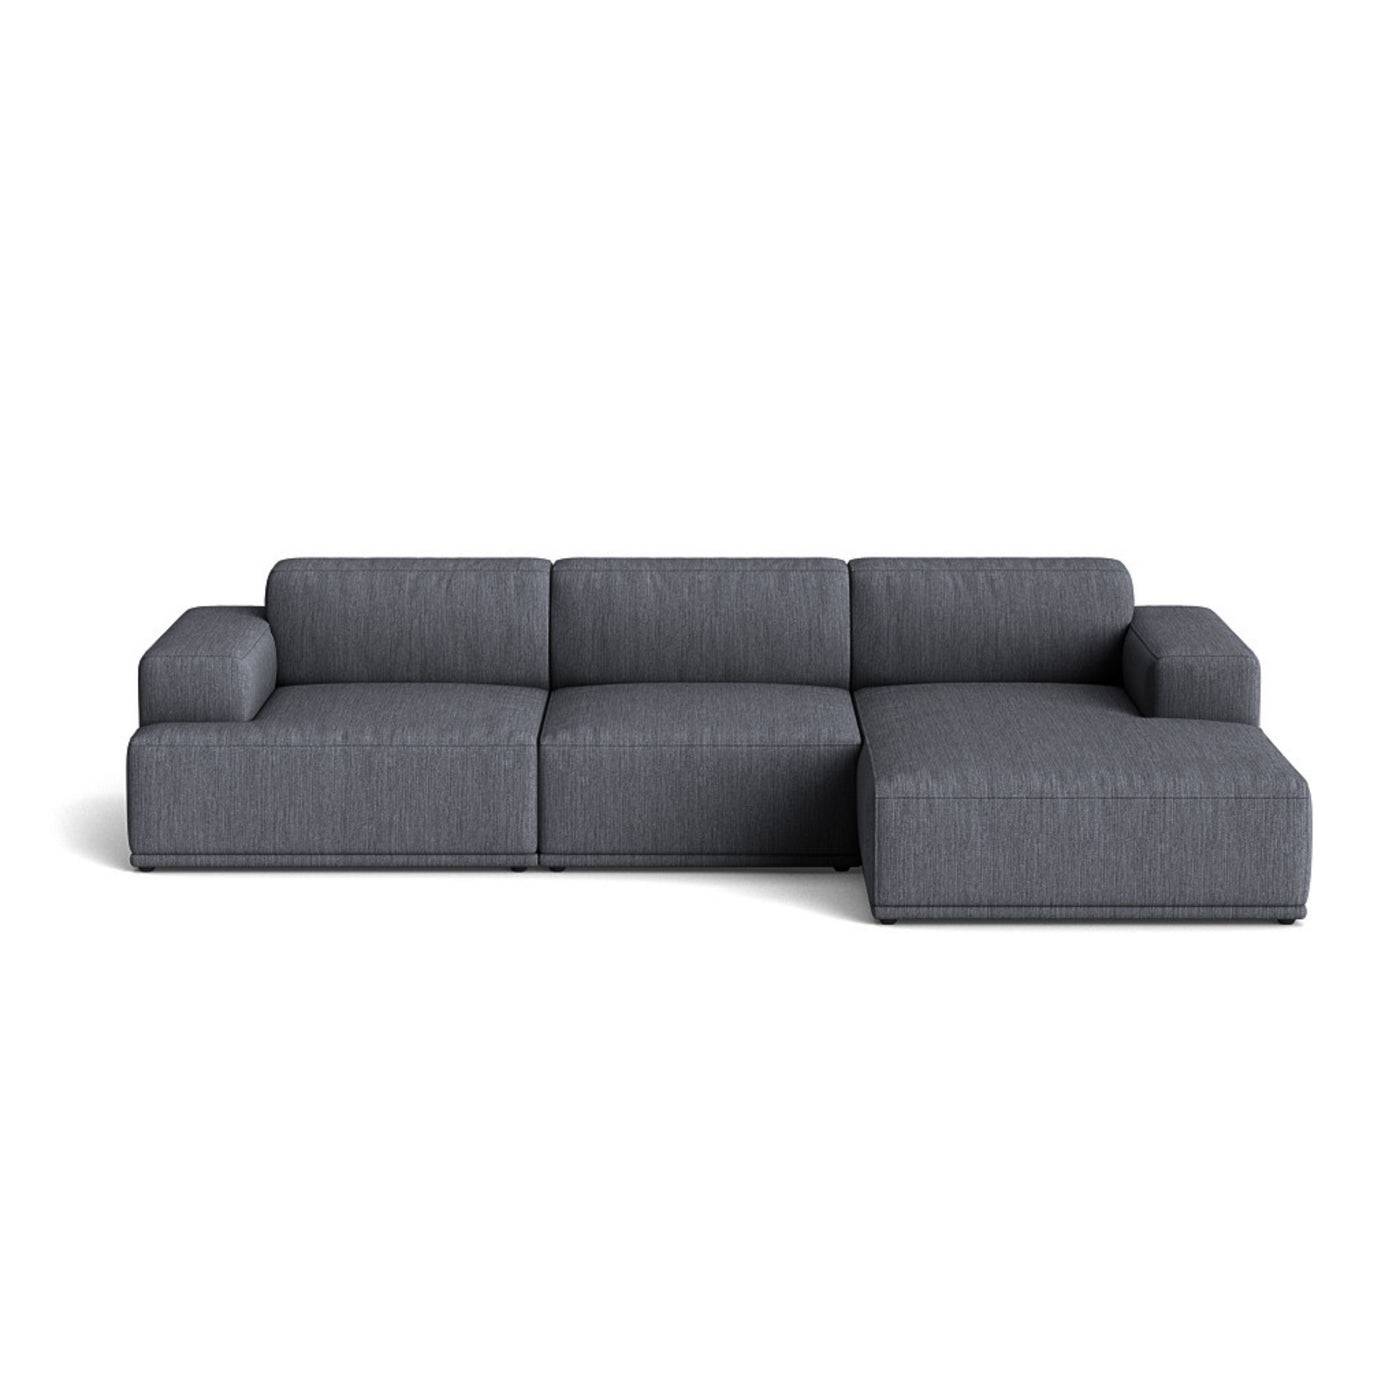 Muuto Connect Soft Modular 3 Seater Sofa, configuration 3. Made-to-order from someday designs. #colour_balder-152